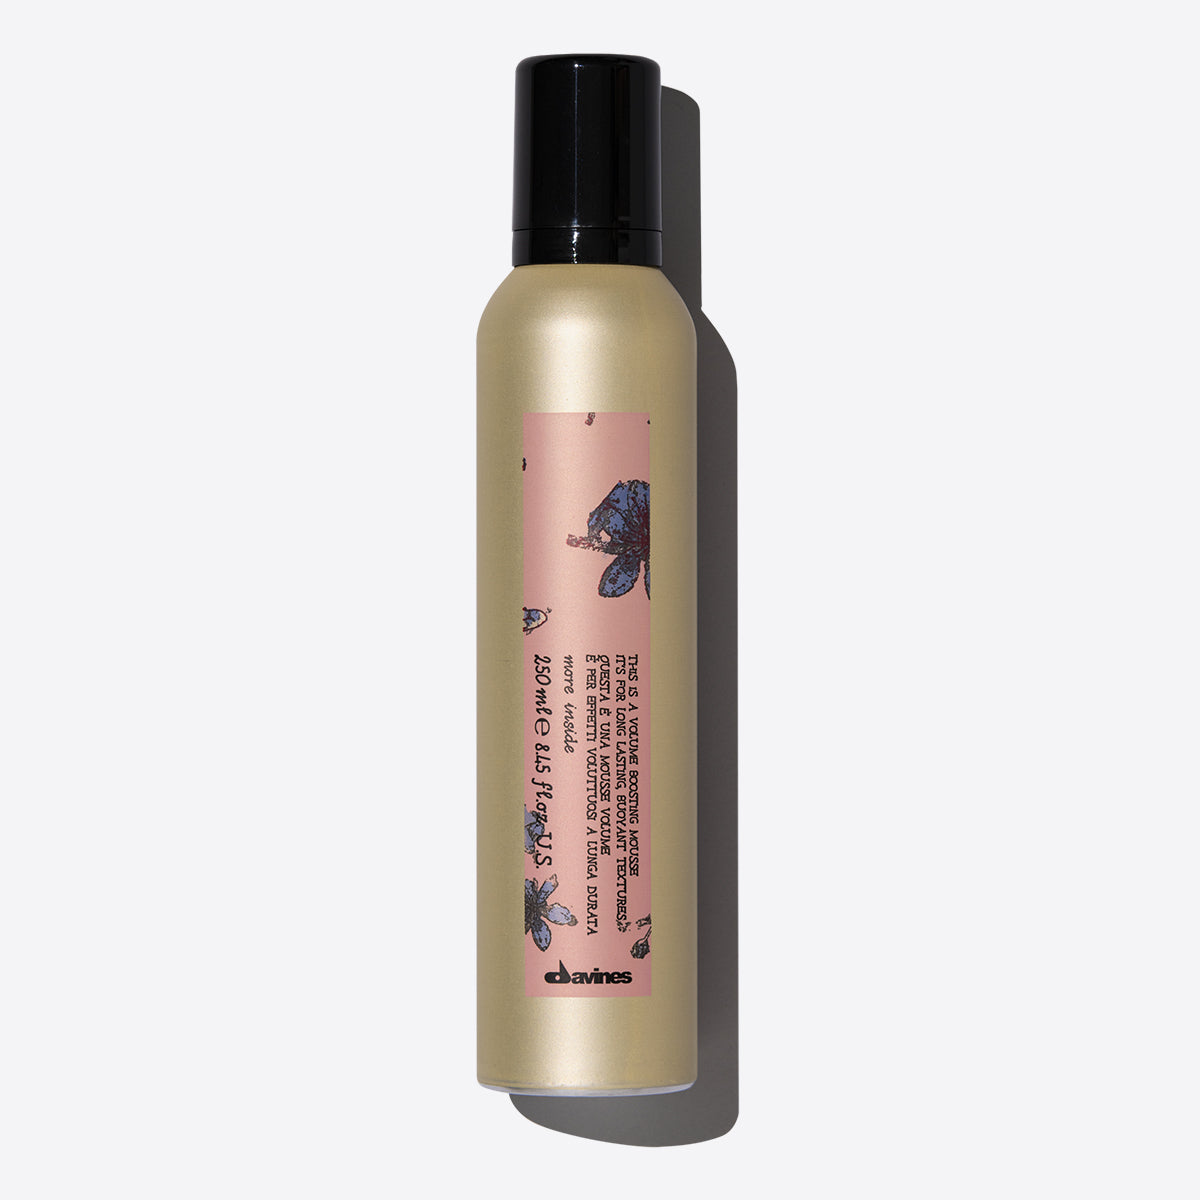 This is a Volume Boosting Mousse 1  Davines
